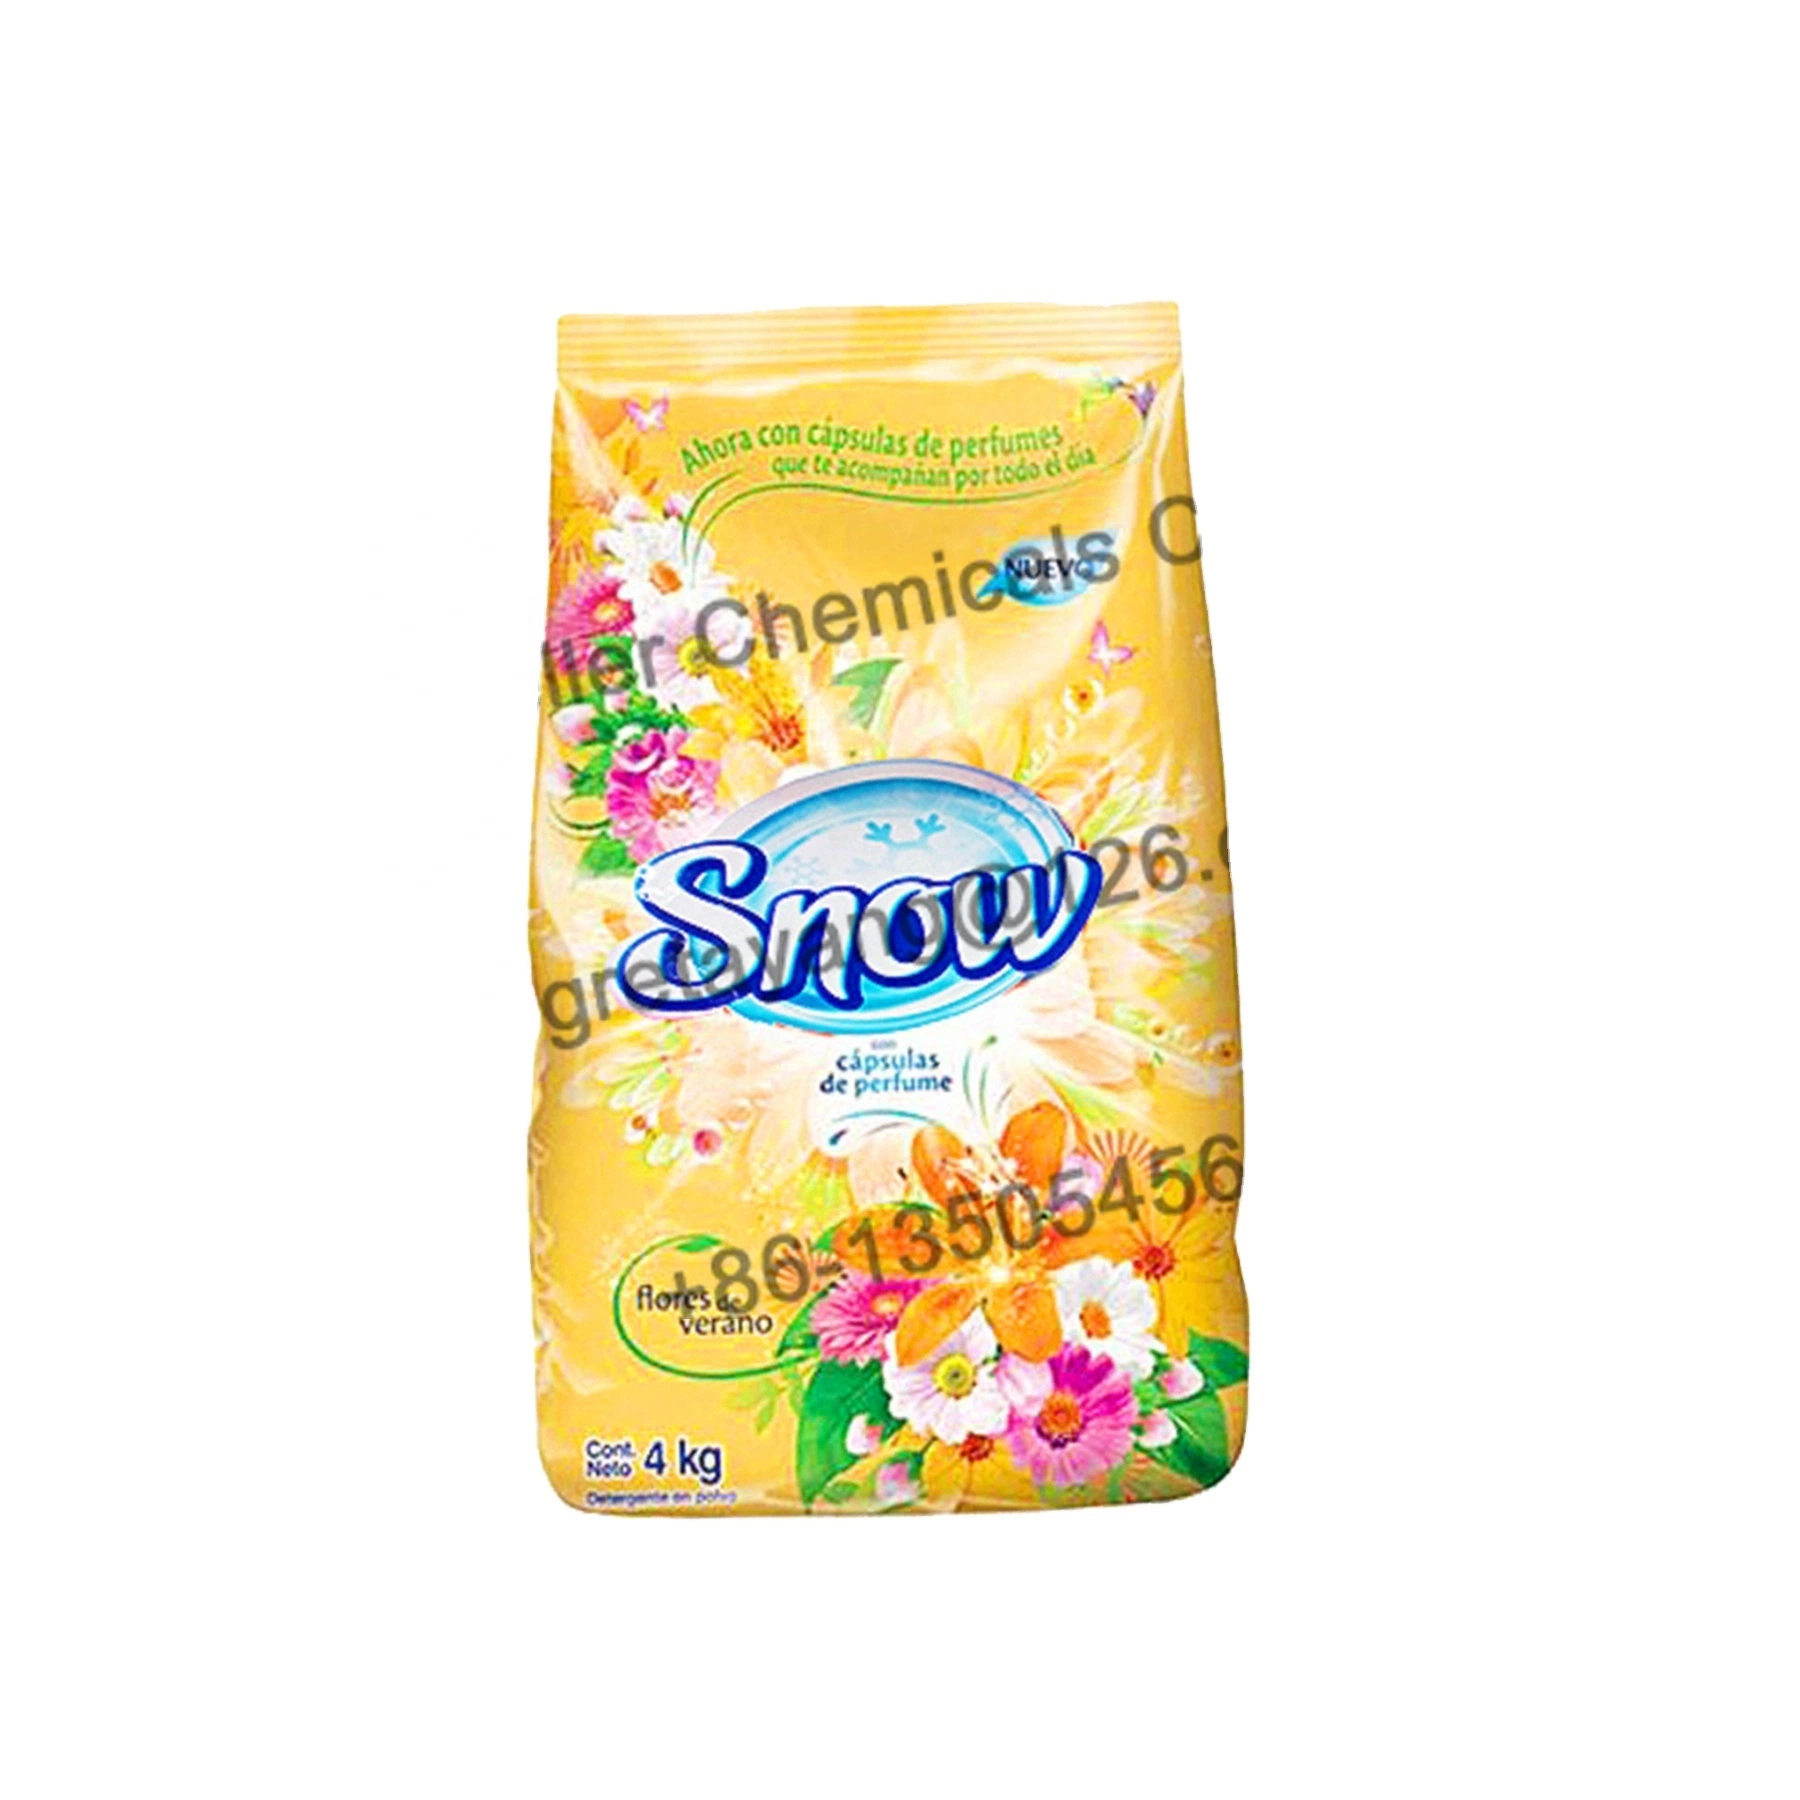 Laundry Detergent Washing Powder for Home Use